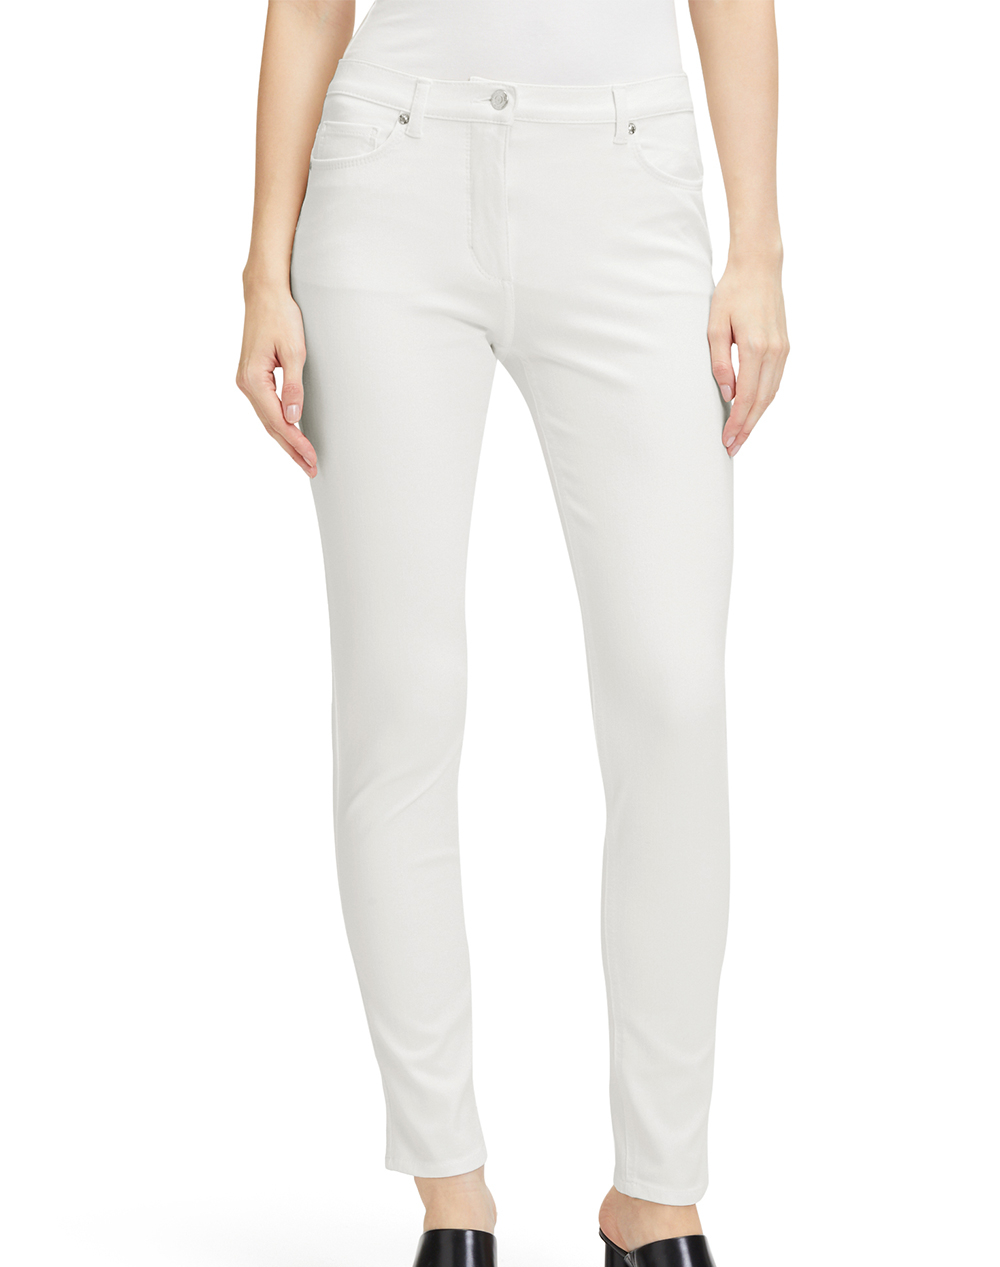 BETTY BARCLAY Jeans 6658/1289-1620 White